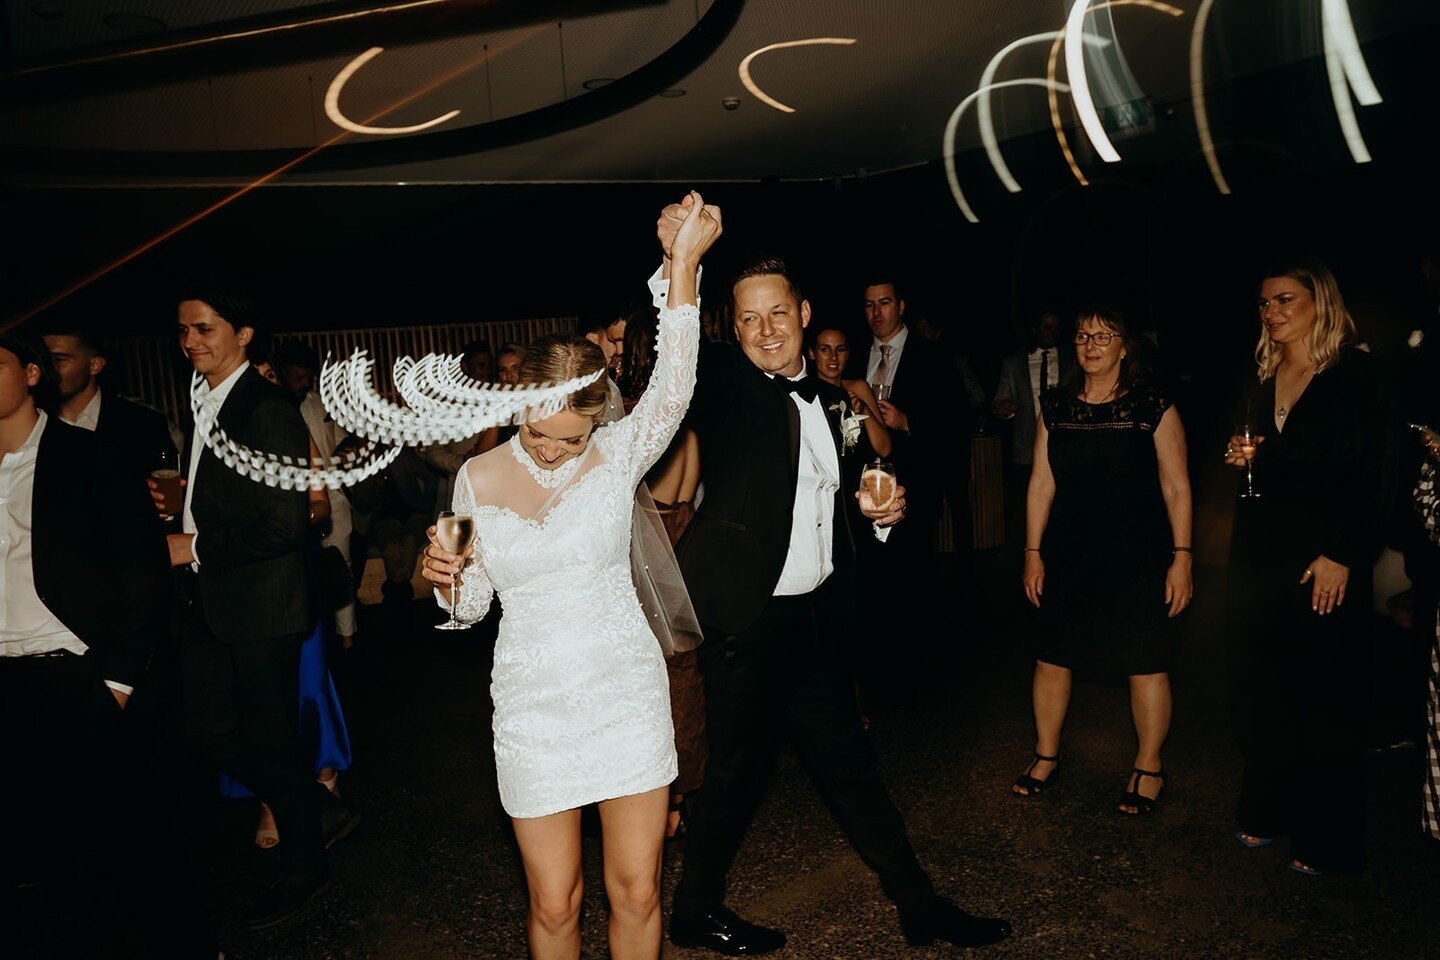 We love an outfit change! Plus more freedom for a boogie which we're all about at The Dunes 🕺🏻⁠
⁠
Photographer: @weddingswryal